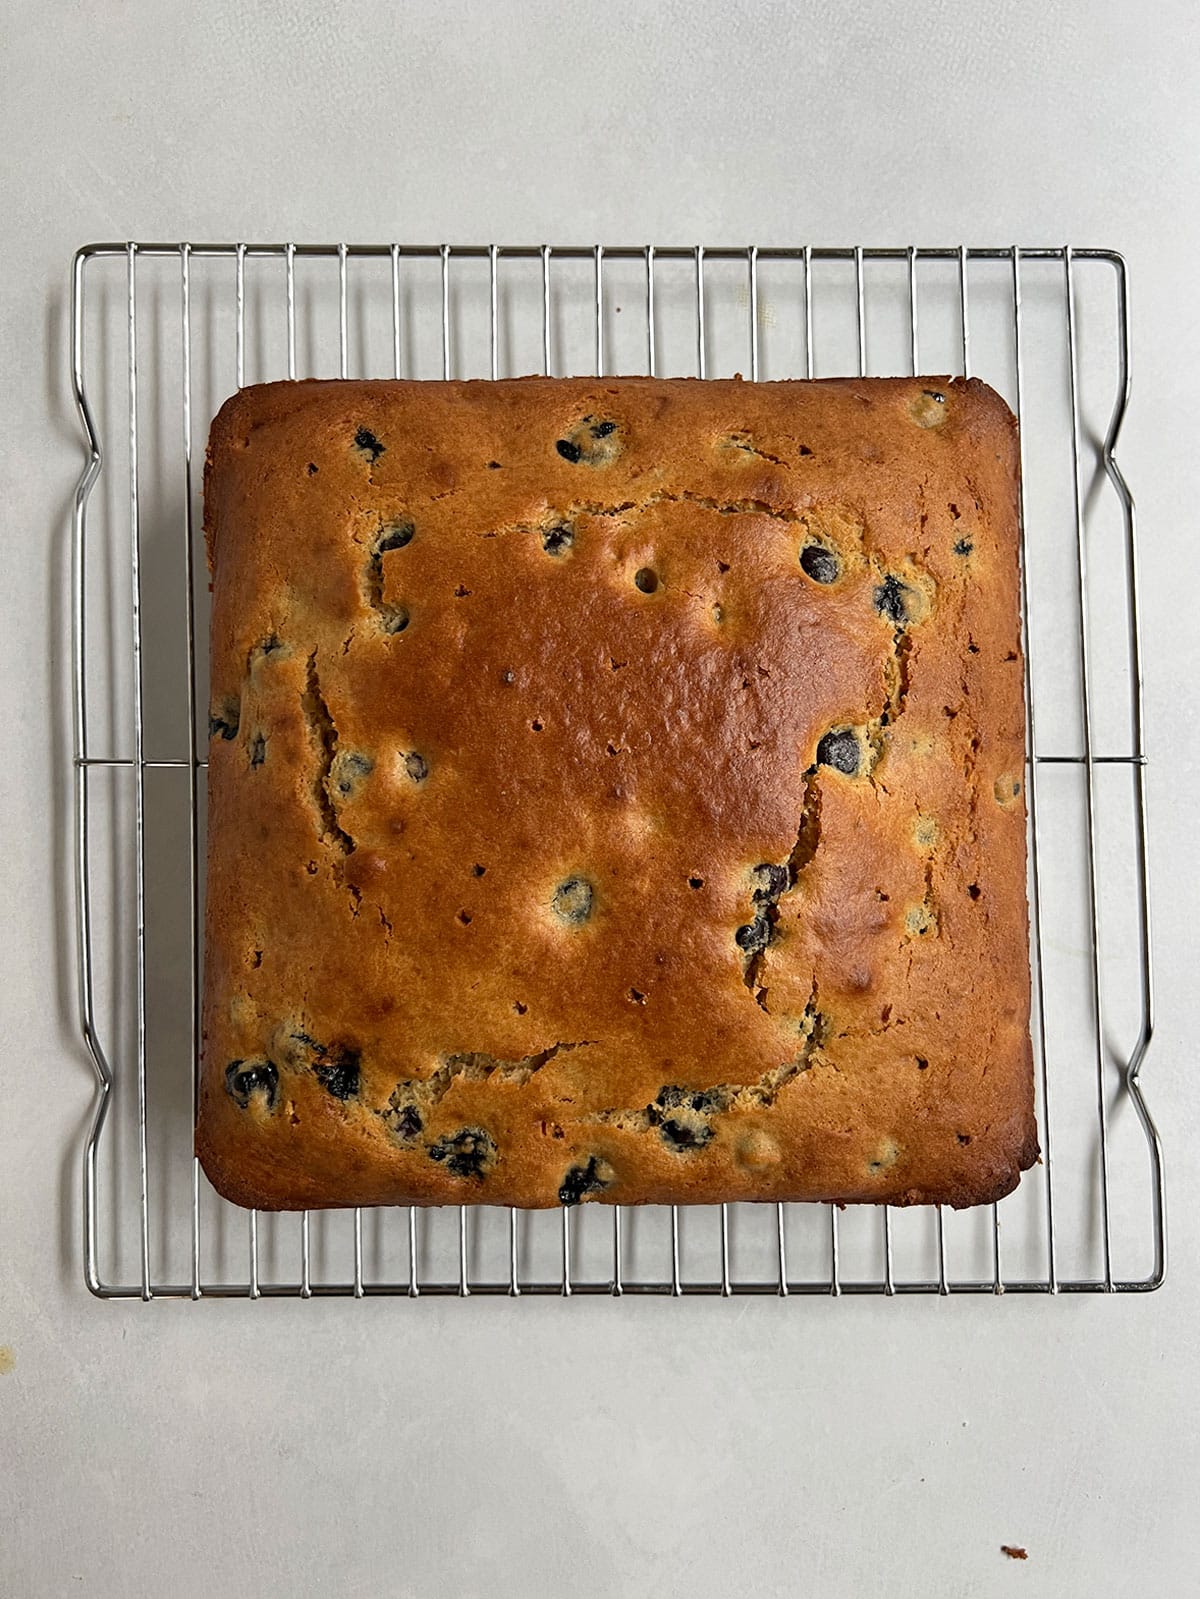 Olive oil blueberry cake on rack with holes poked in it before glaze is added.